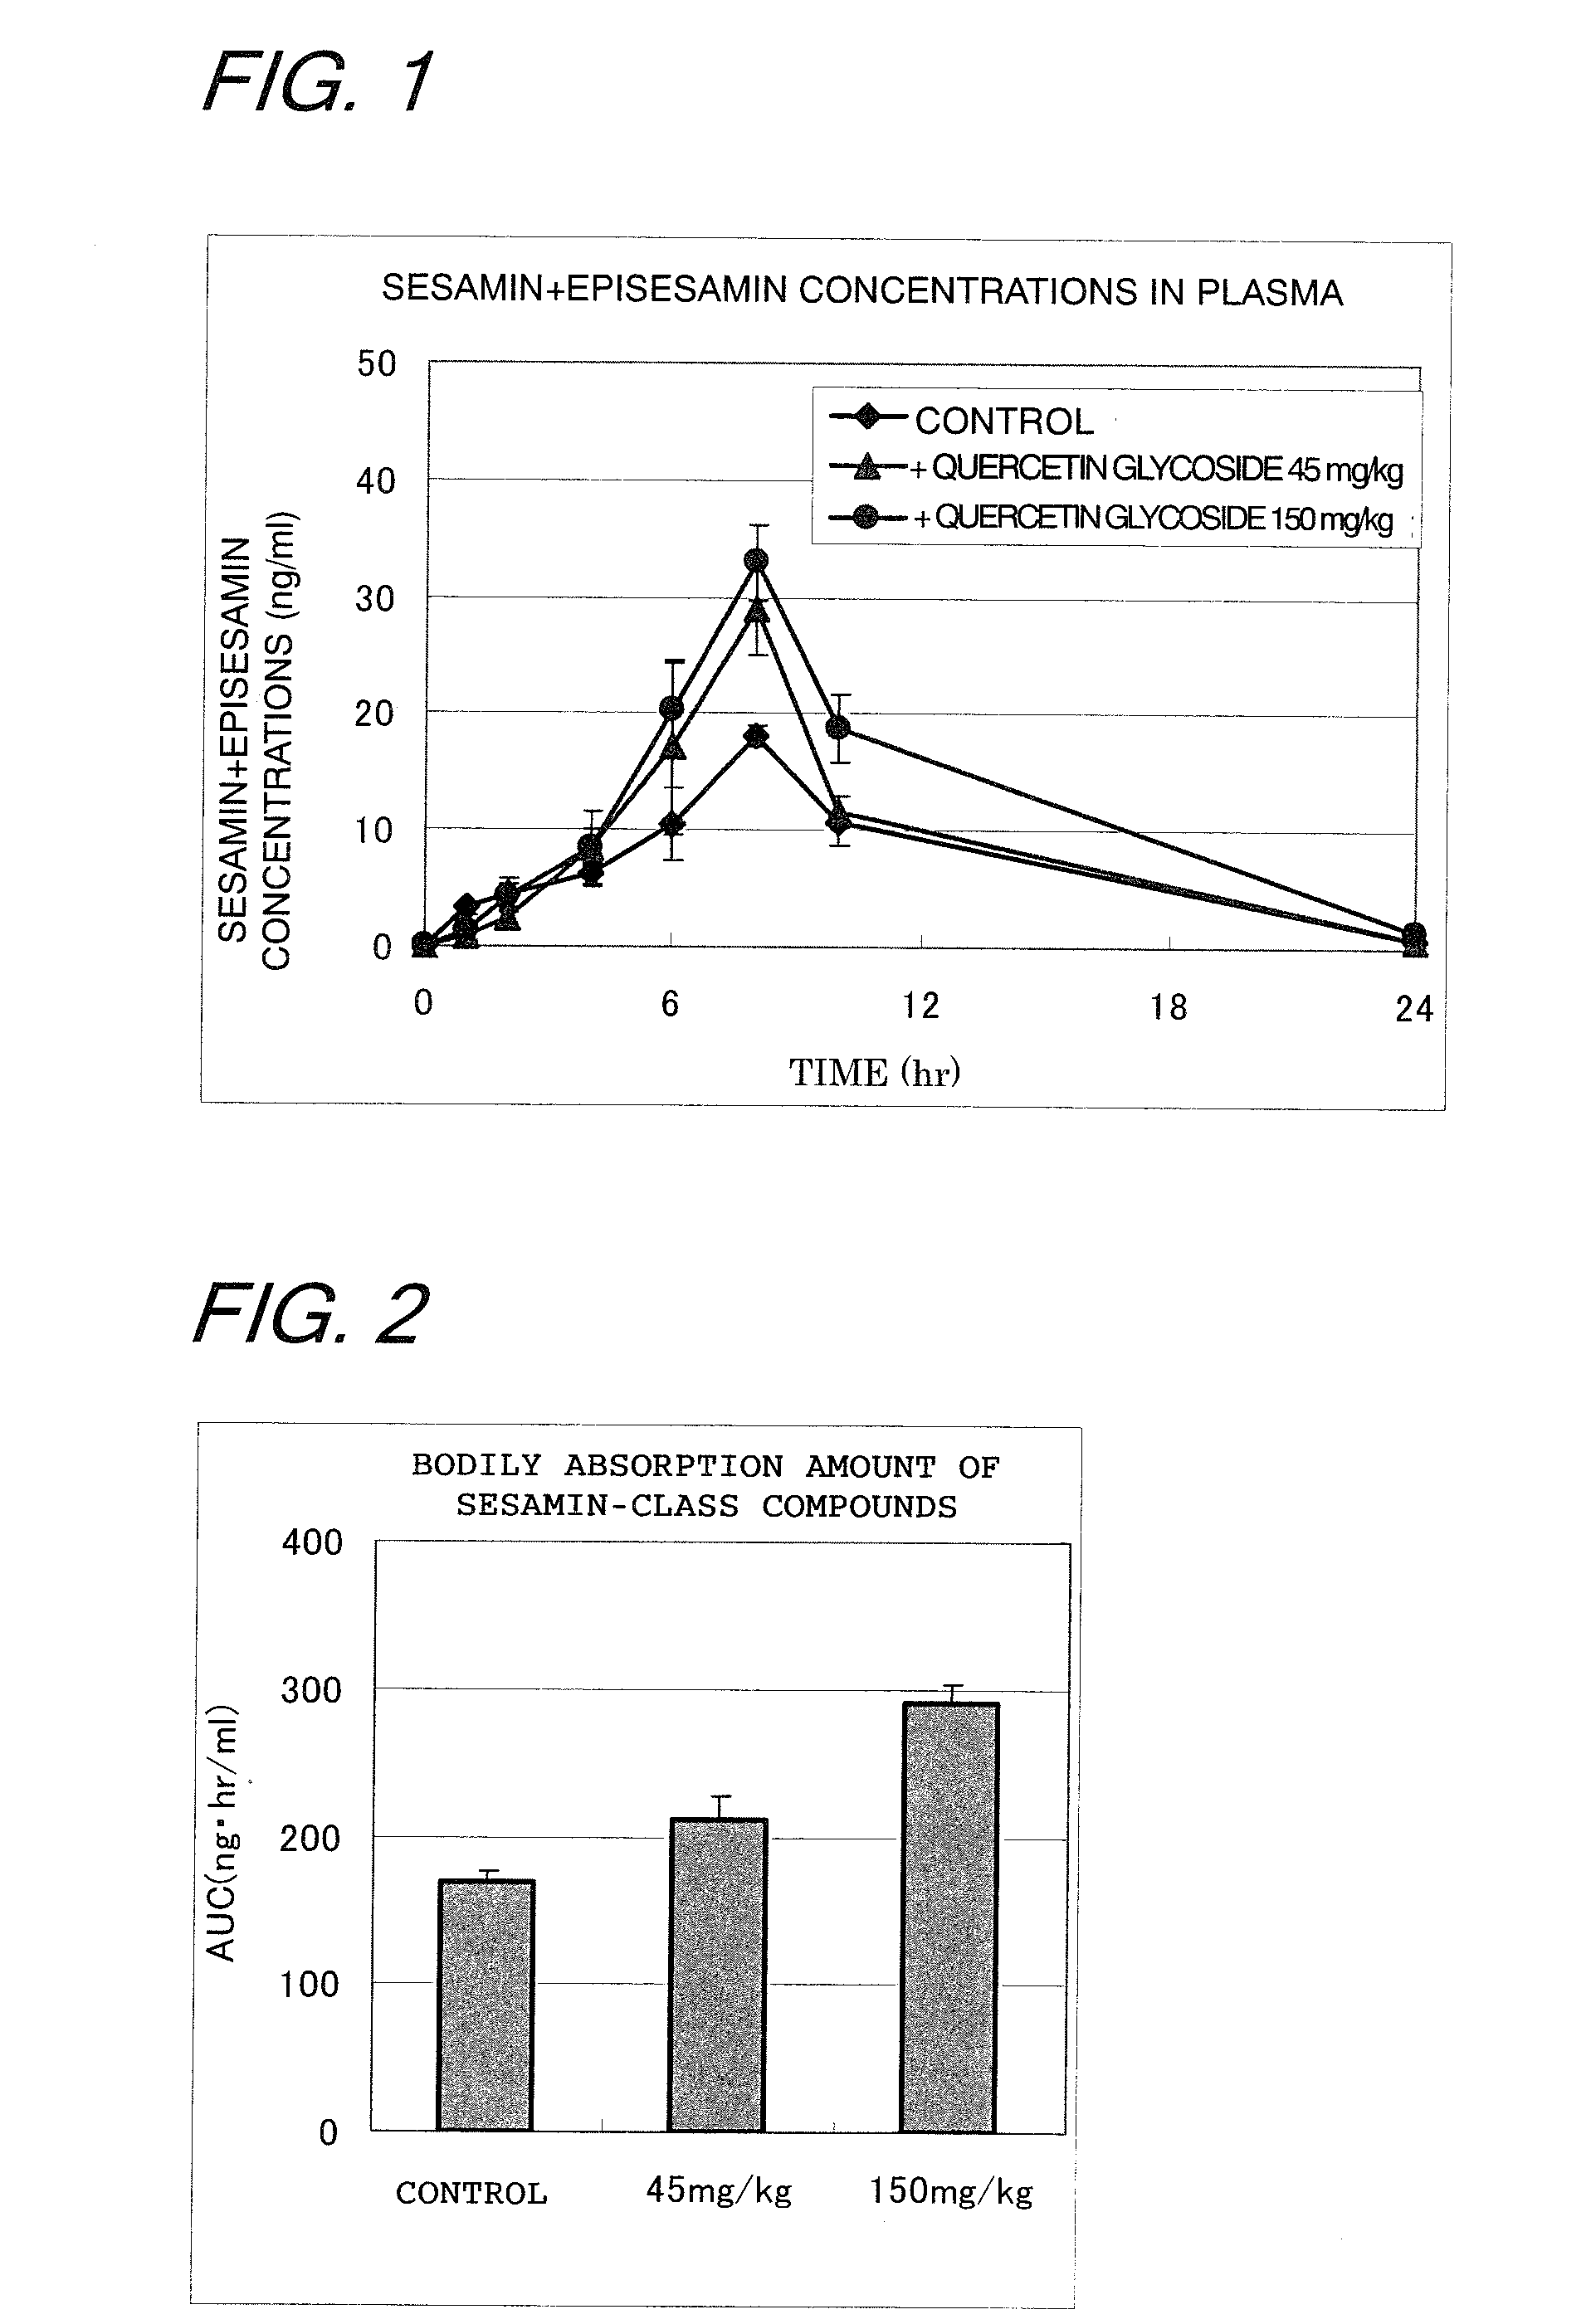 Compositions containing sesamin-class compound(s) and quercetin glycoside(s)